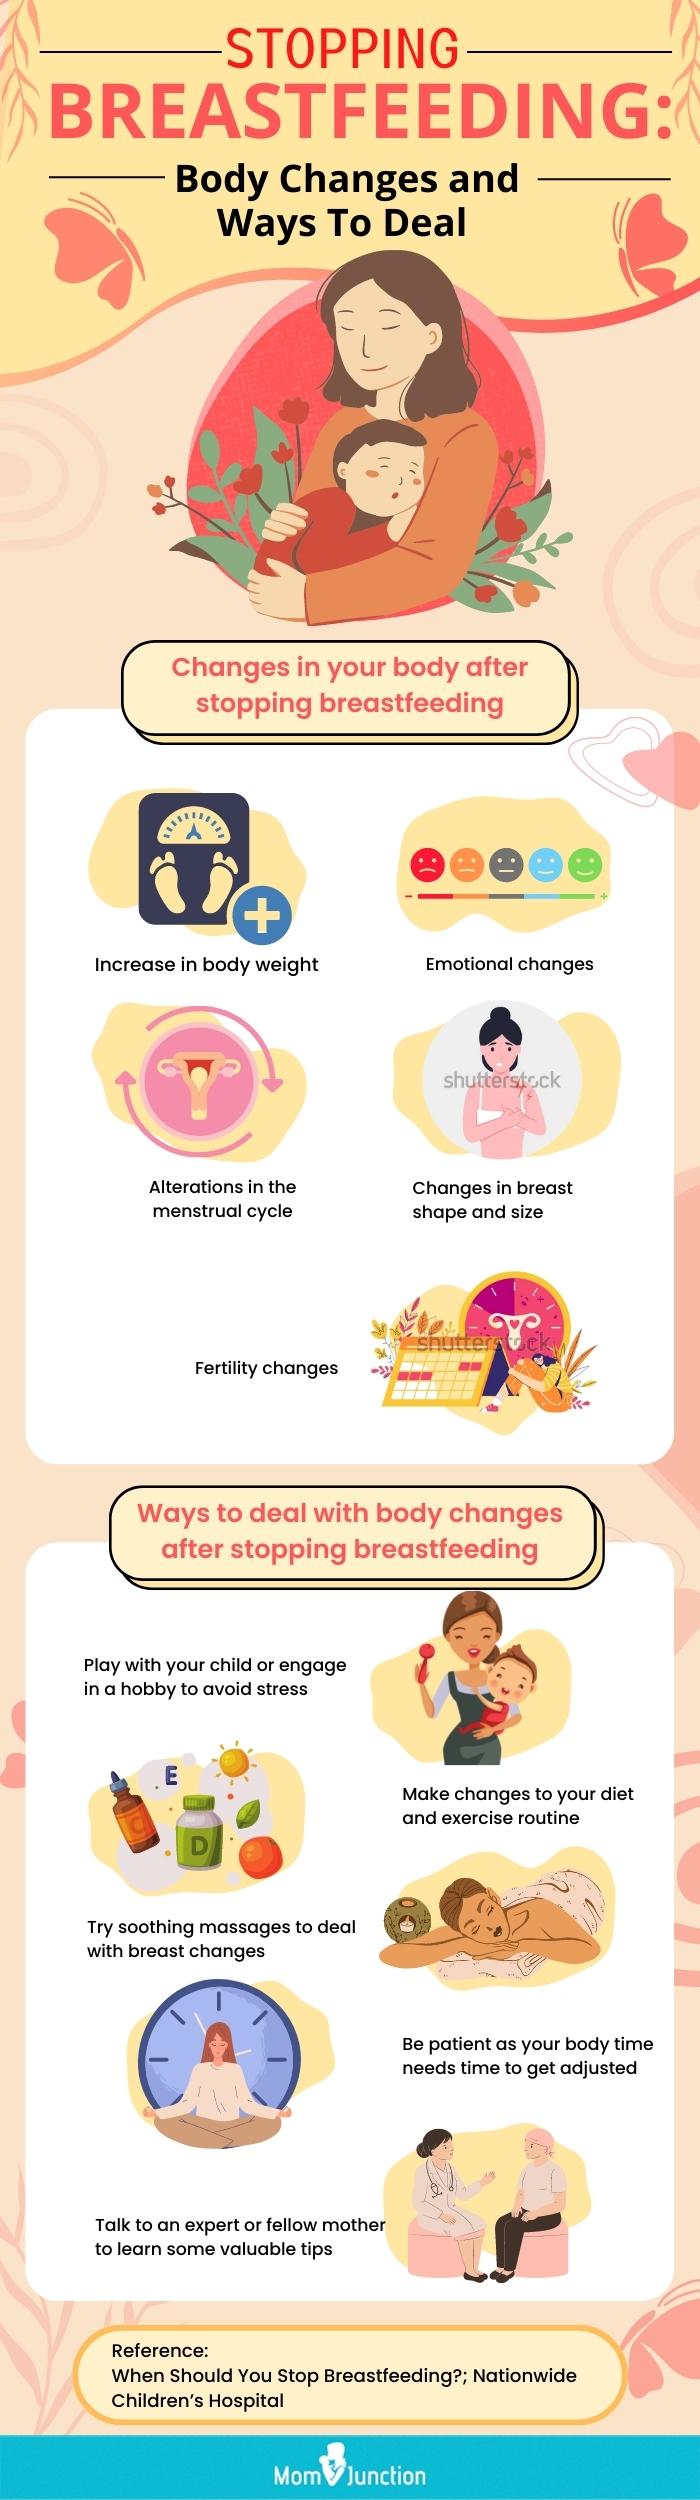 Stopping Breasfeeding Tips - How to Stop Breasteeding